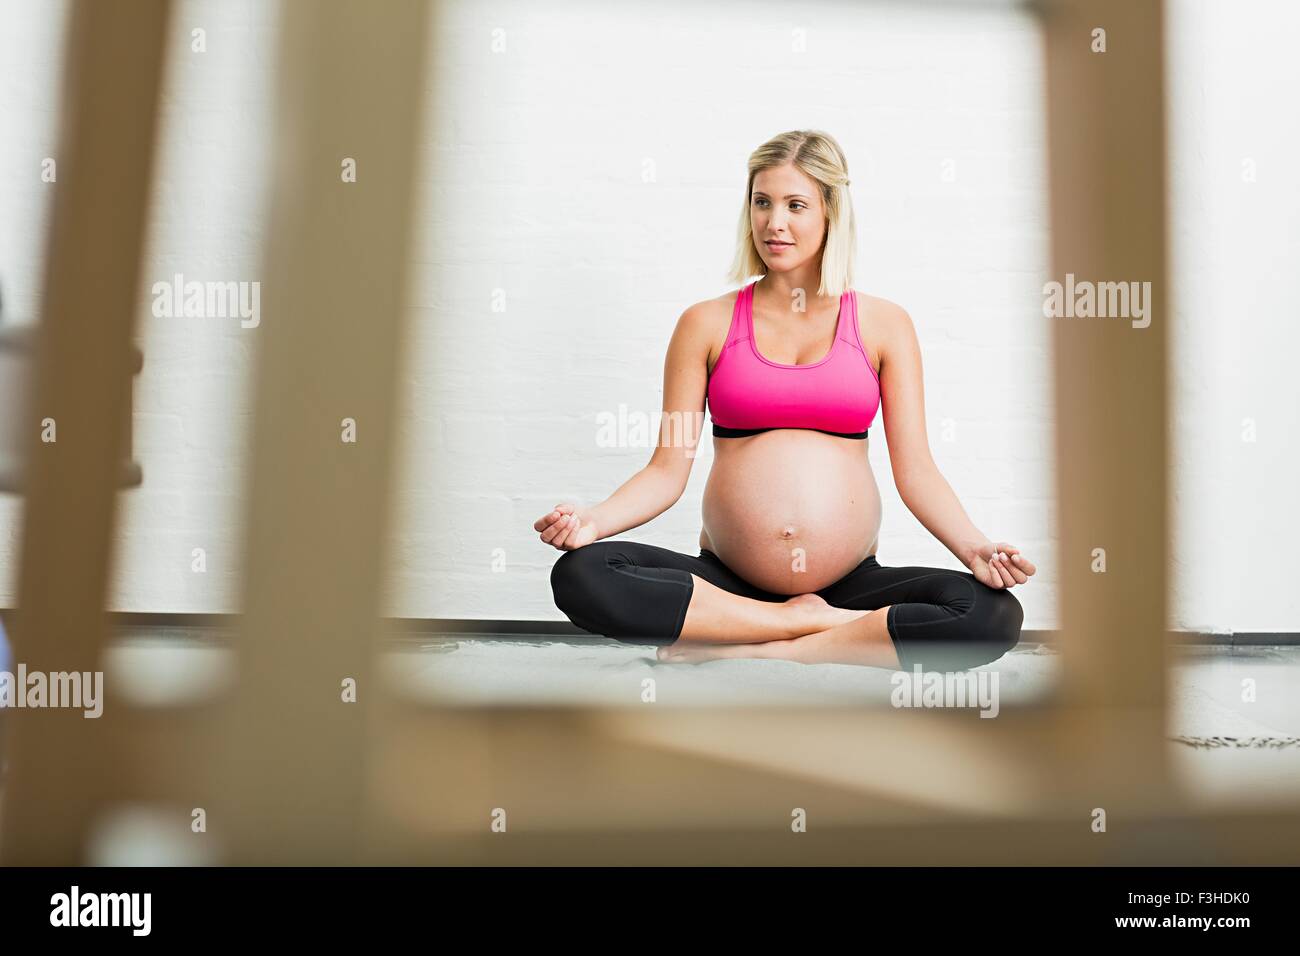 Full term pregnancy young woman practicing yoga Stock Photo